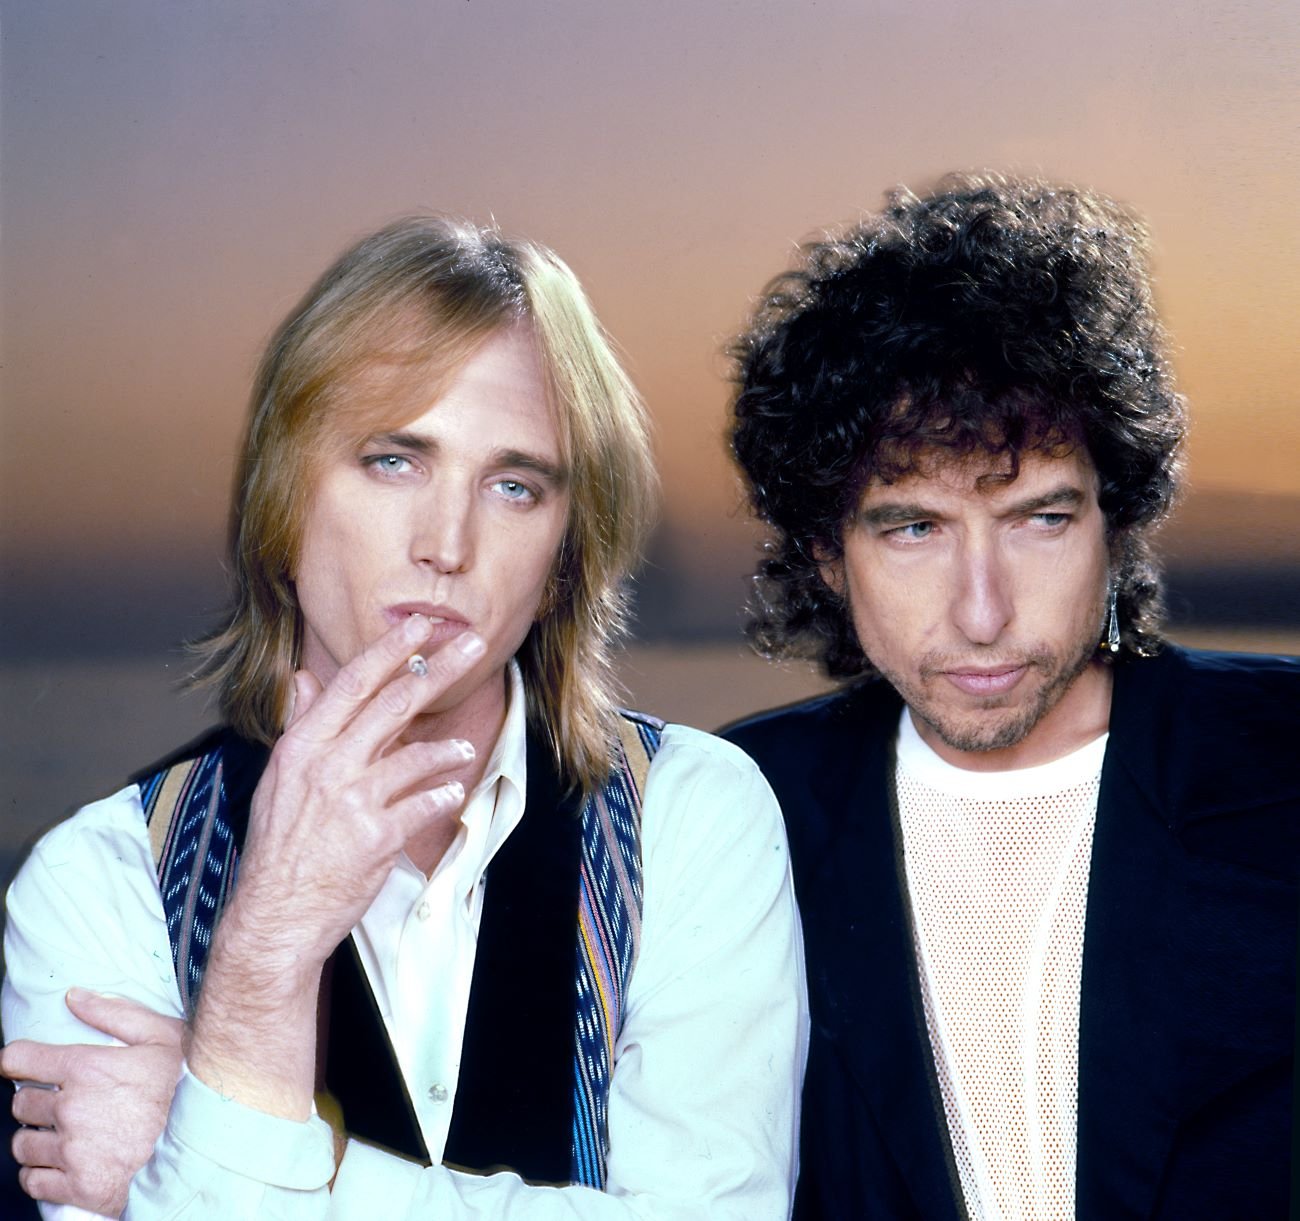 Tom Petty wears a white shirt and a vest and smokes a cigarette. Bob Dylan wears a white shirt and black vest.